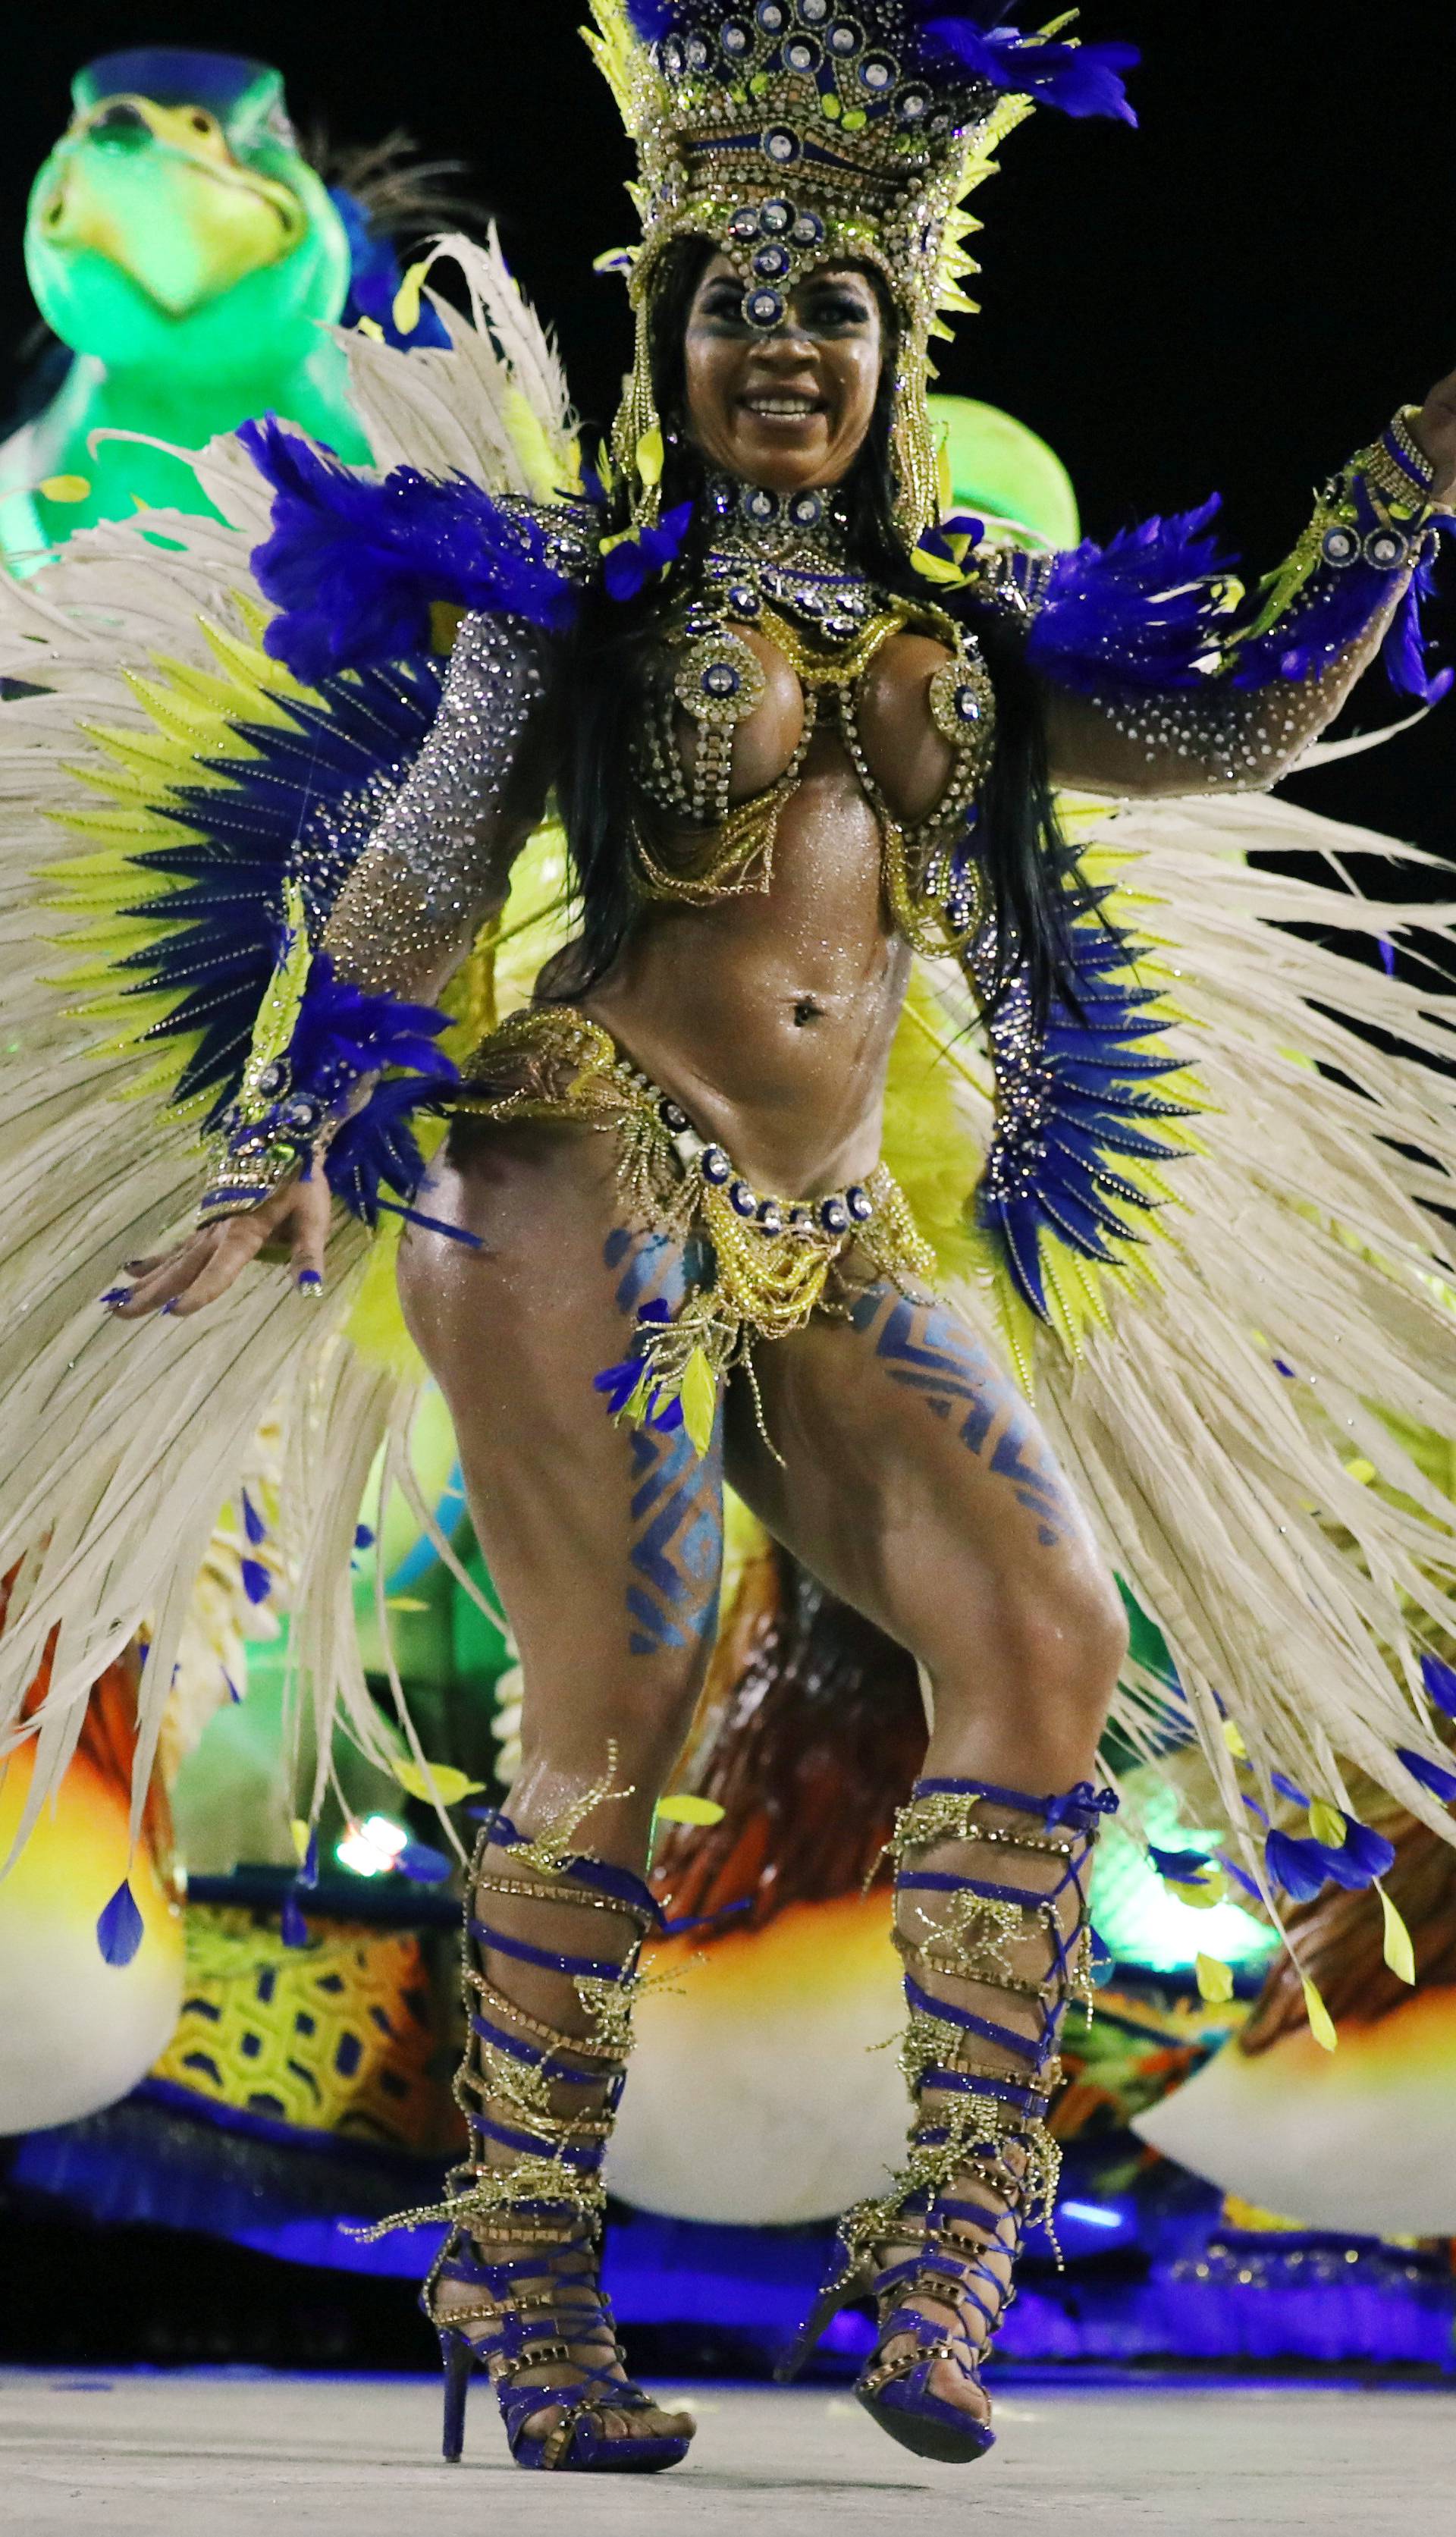 A reveller from Uniao da Ilha Samba school performs during the second night of the Carnival parade at the Sambadrome in Rio de Janeiro